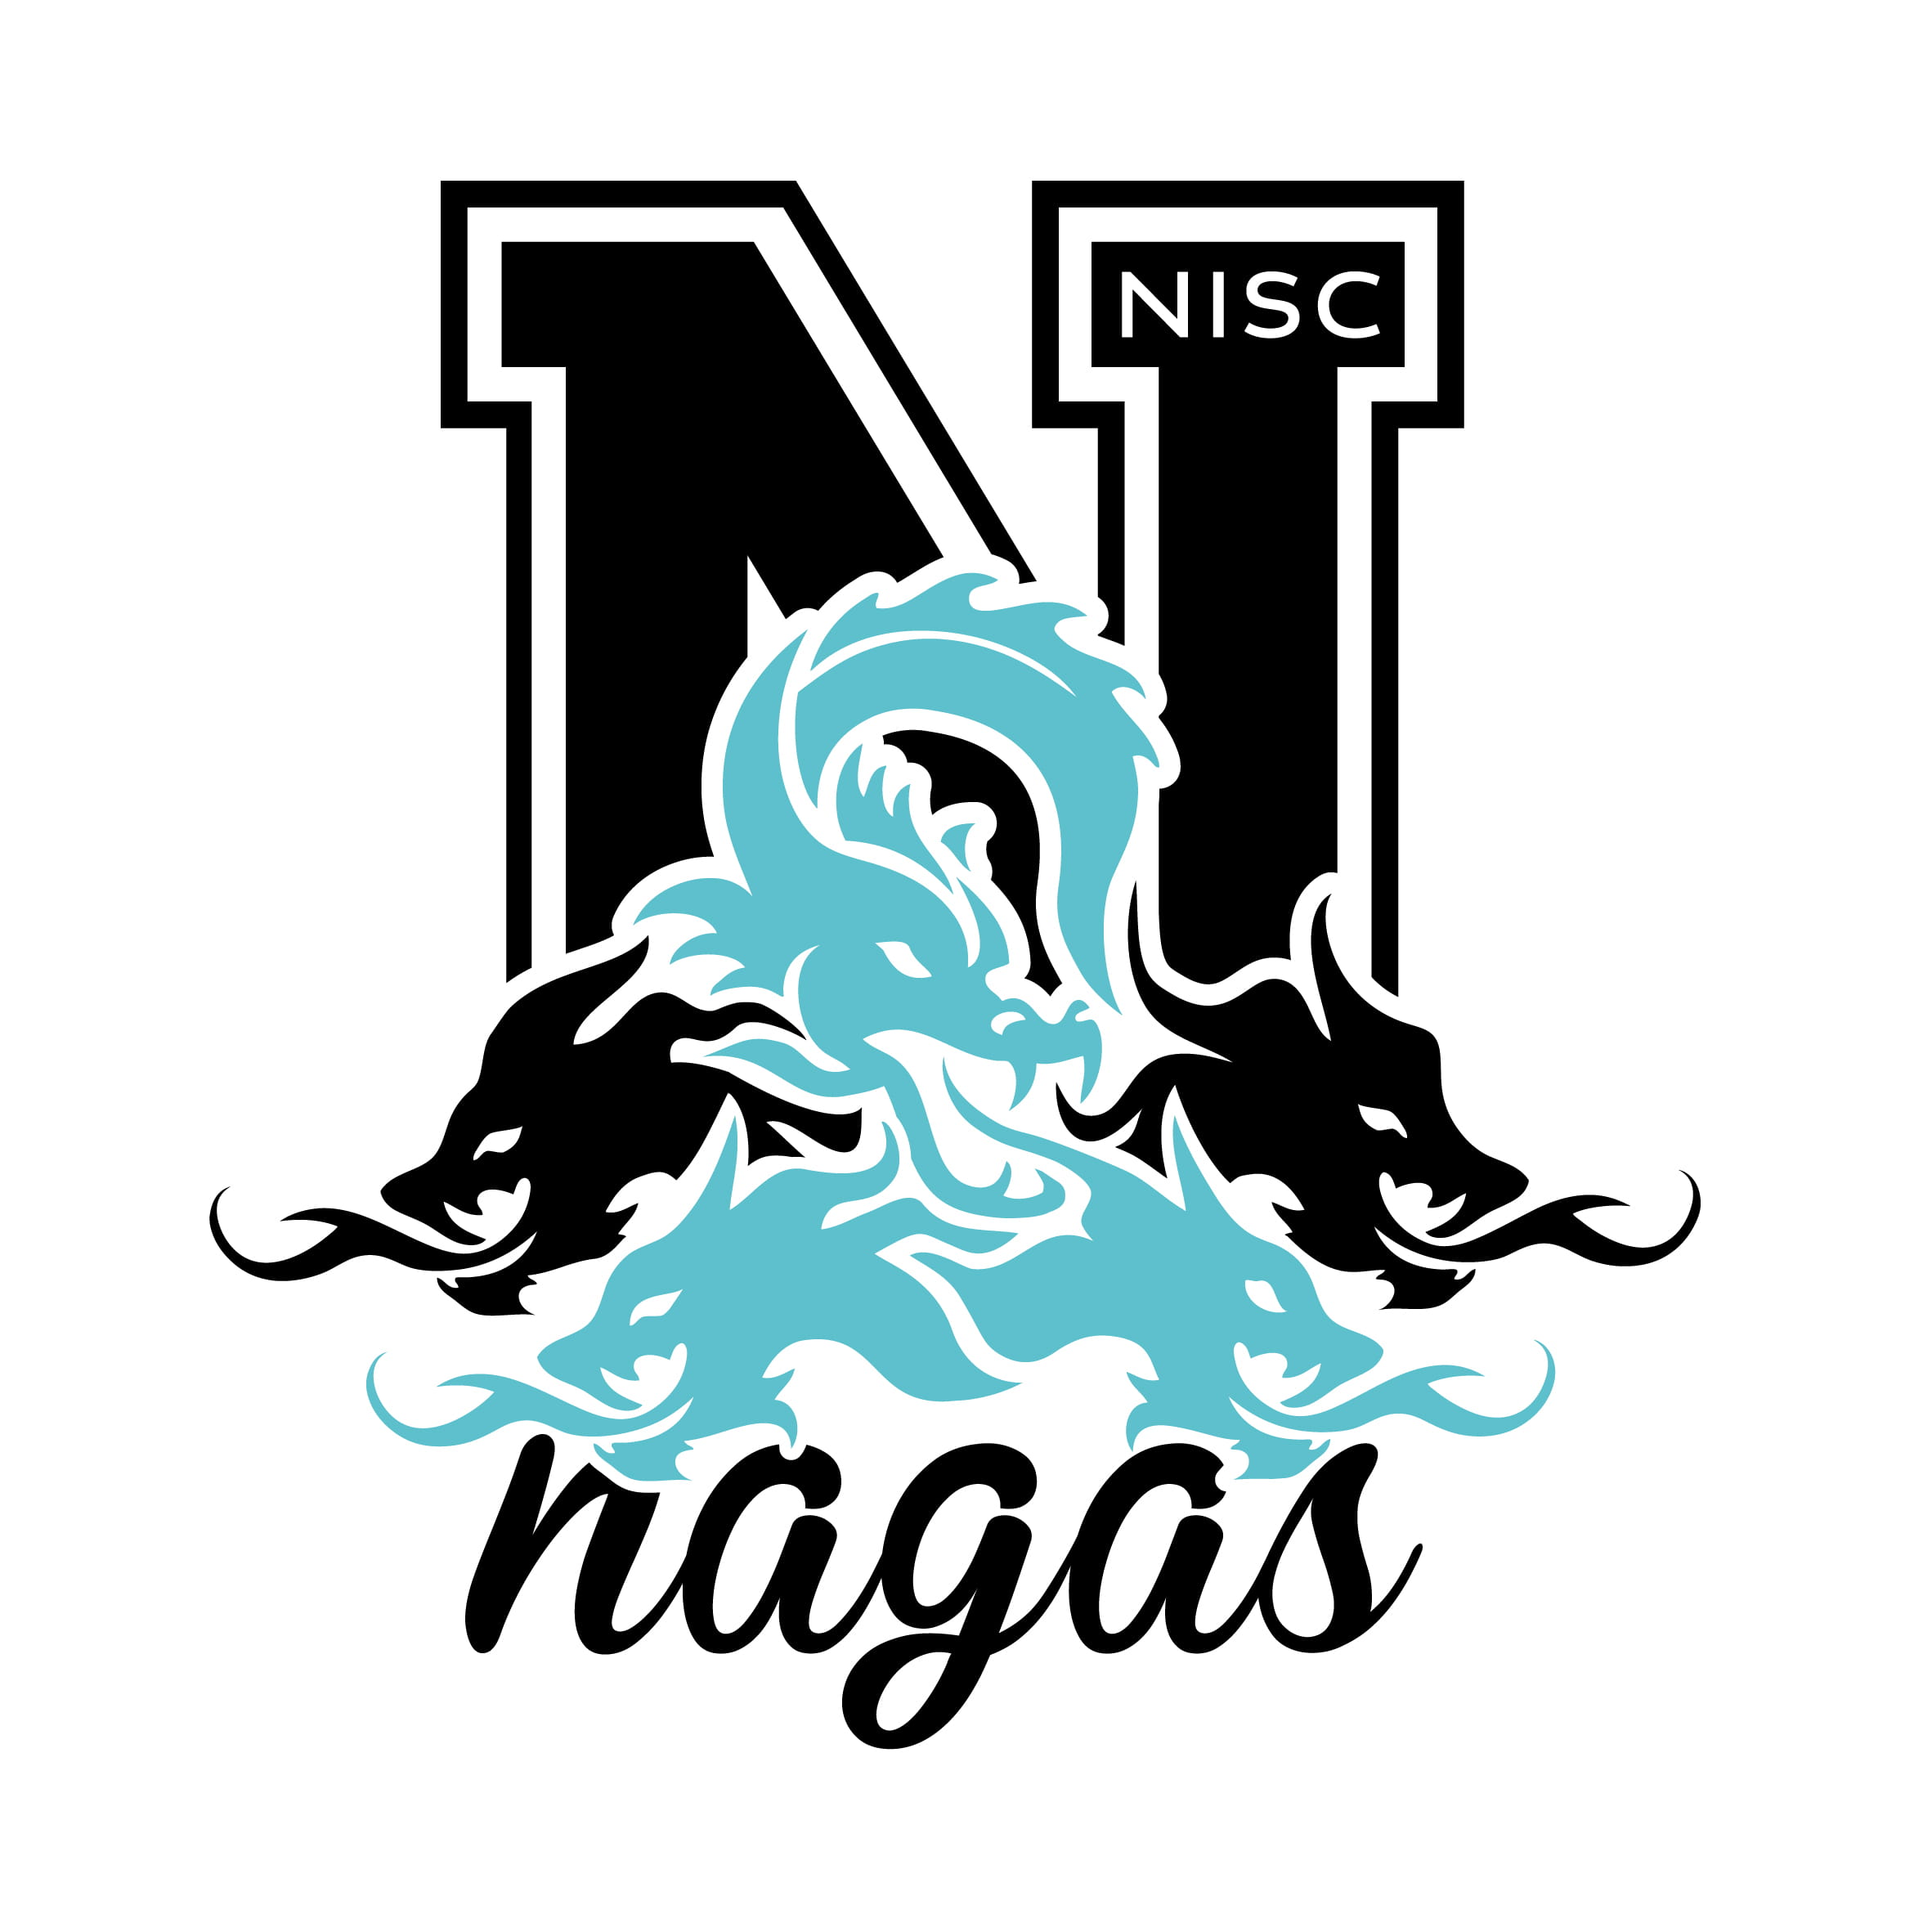 Northbridge Nagas swim, basketball and volleyball teams score top results at local sports meets-northbridge-nagas-swim-basketball-and-volleyball-teams-score-top-results-at-local-sports-meets-Copy of Copy of NISC nagas logo01